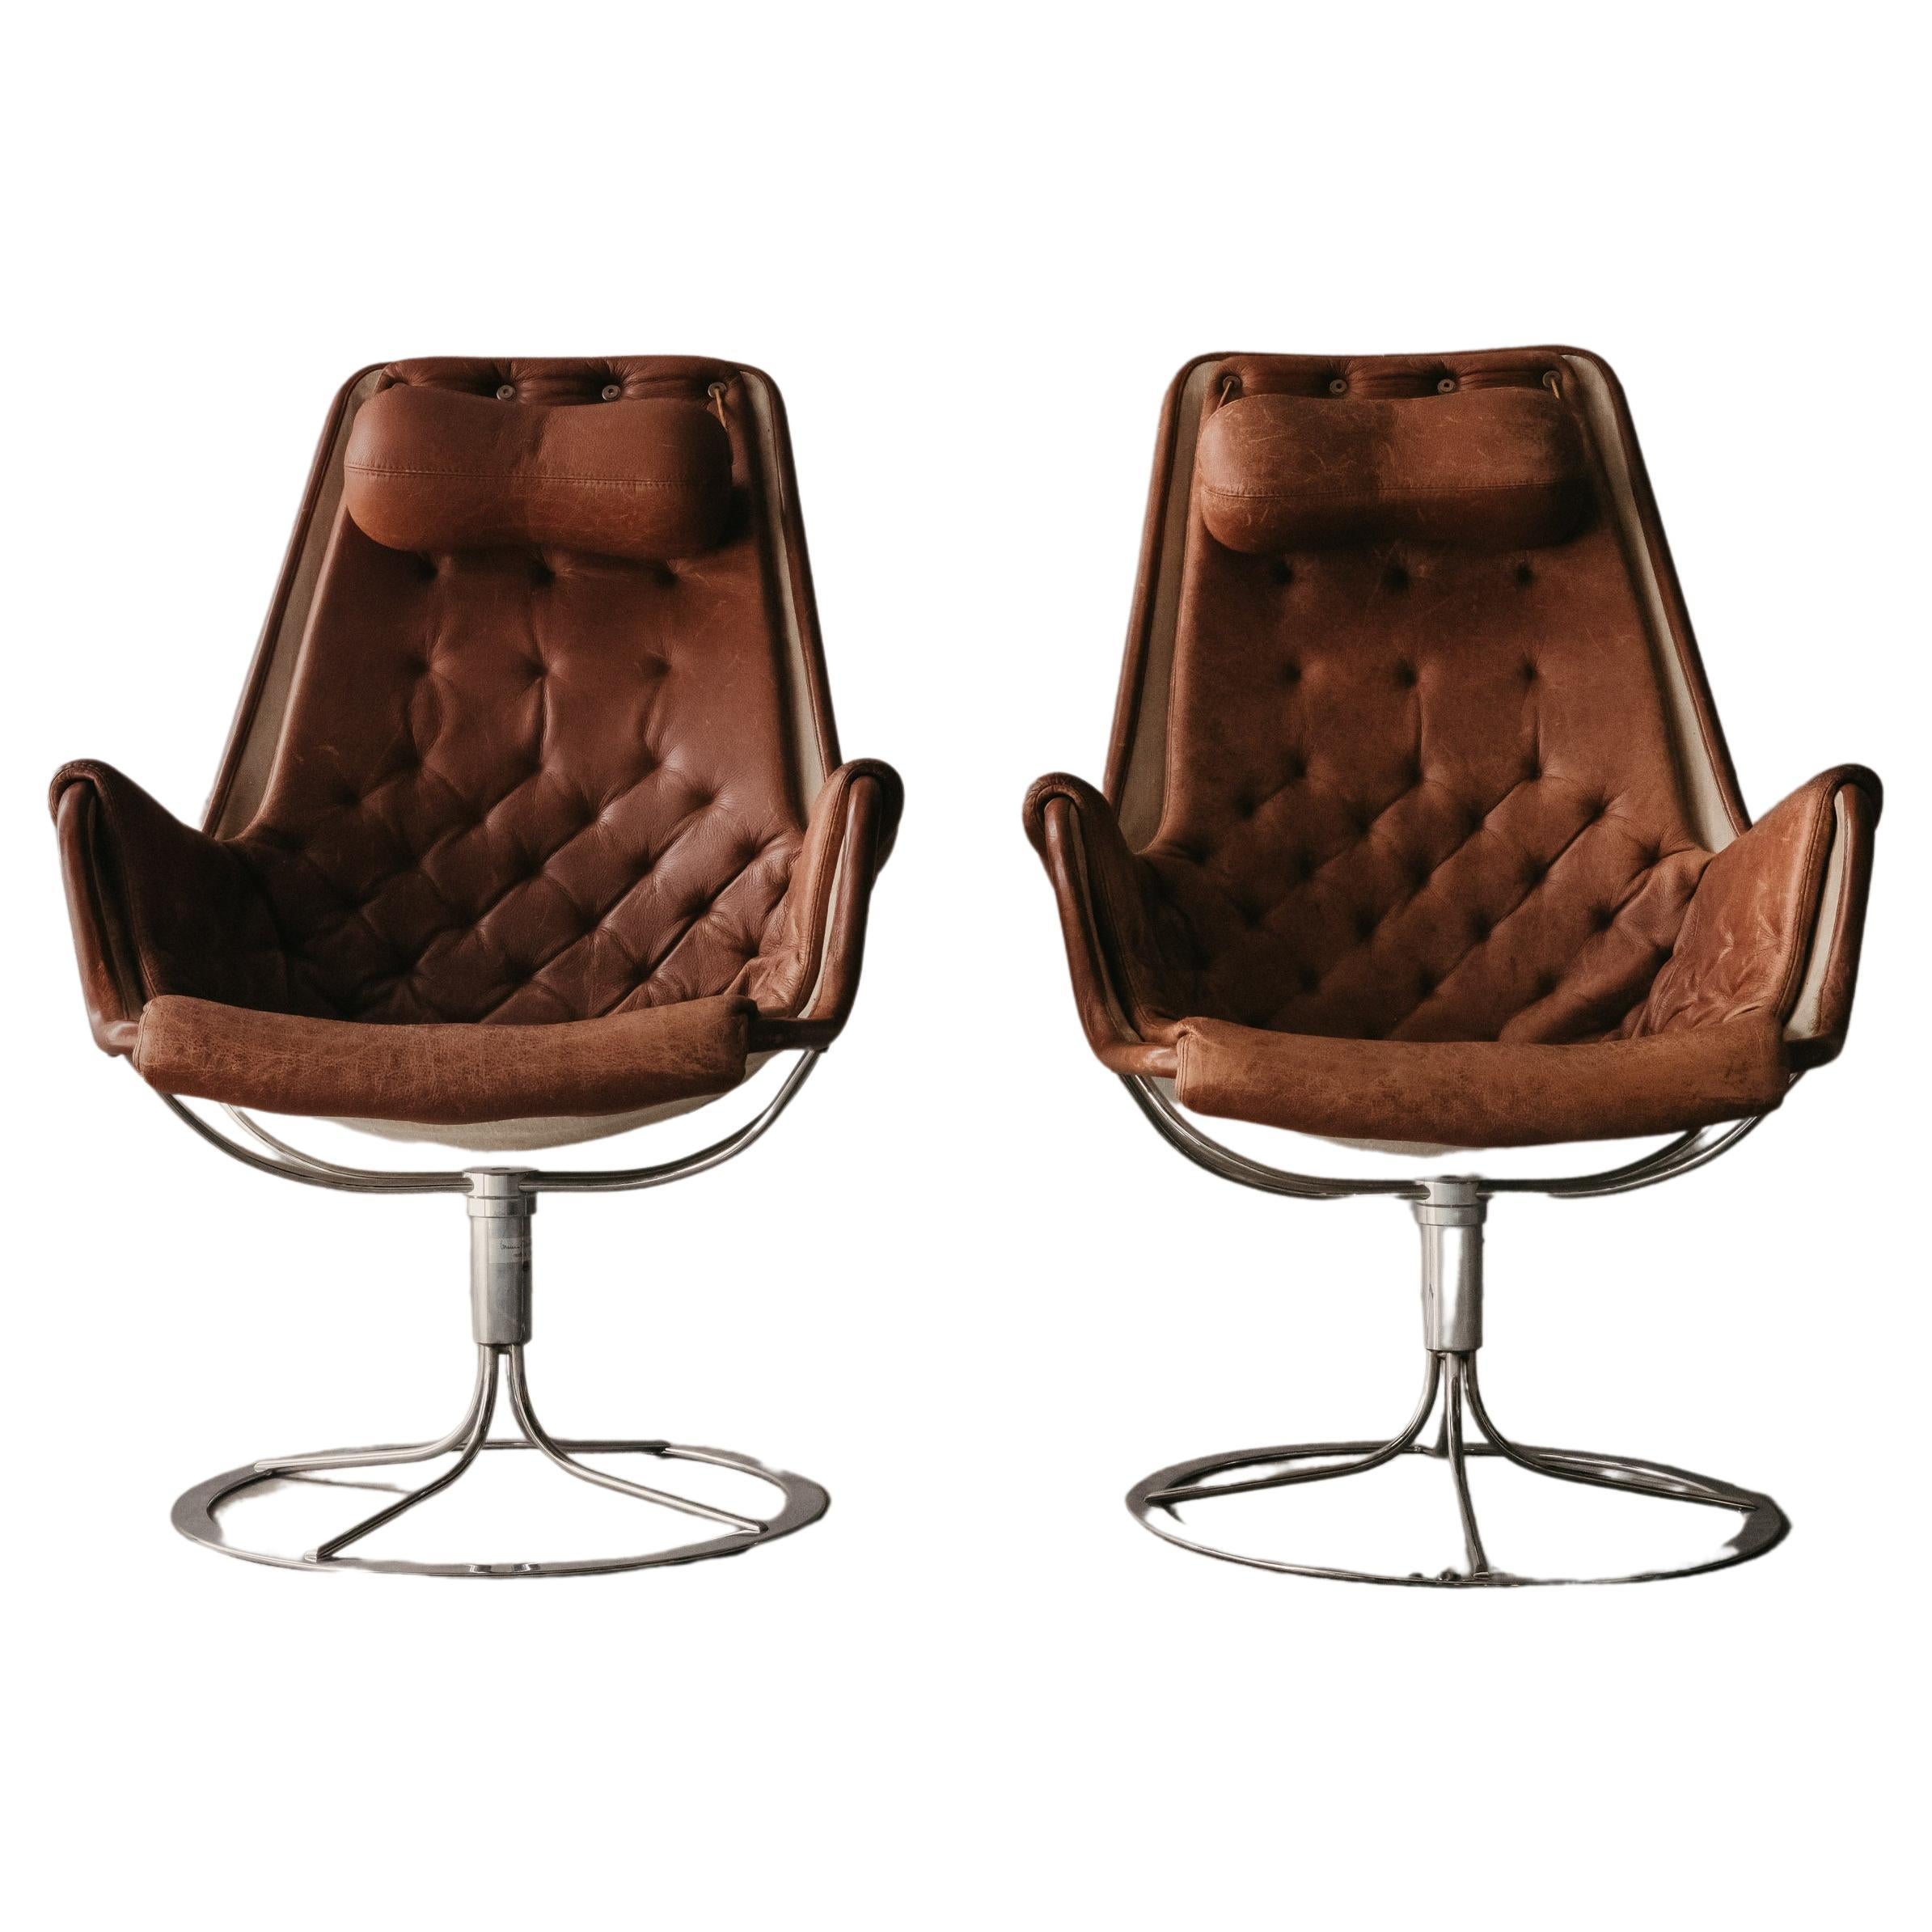 Vintage Pair of Bruno Mathsson Jetson Lounge Chairs, from Sweden, circa 1980 For Sale